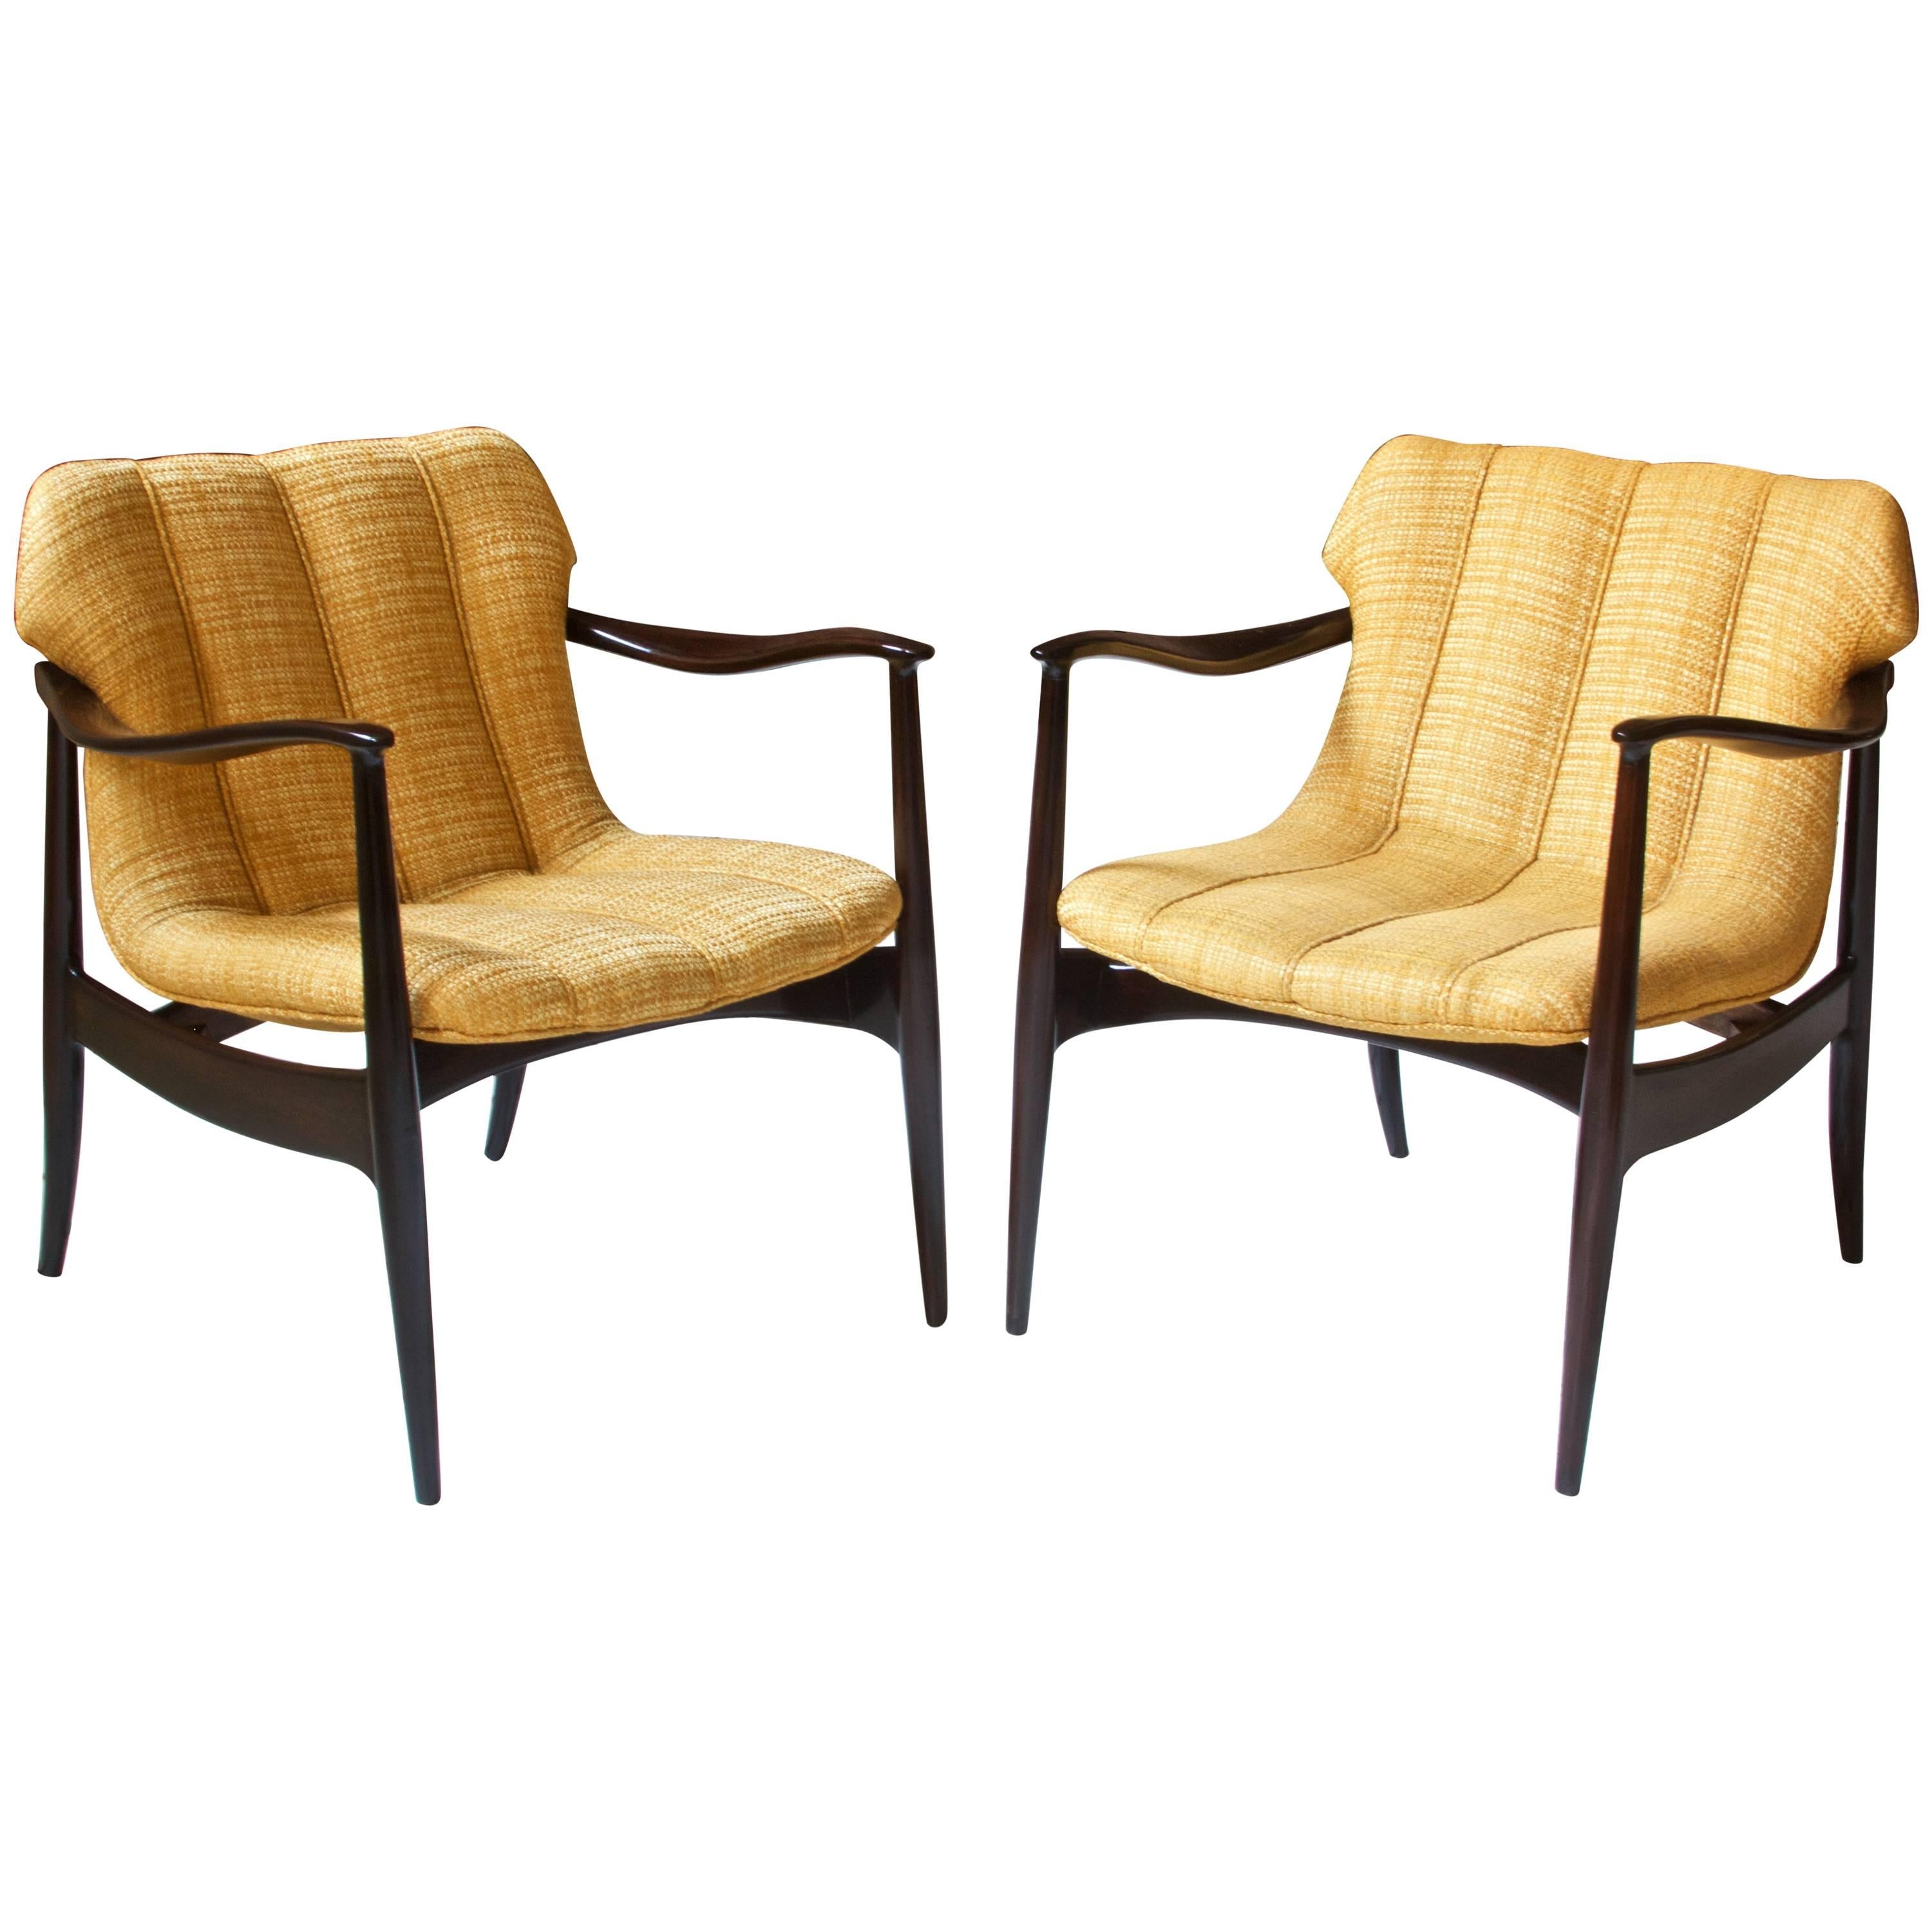 Vintage Pair of Walnut Armchairs by Bertha Schaefer for Singer & Sons, 1960s